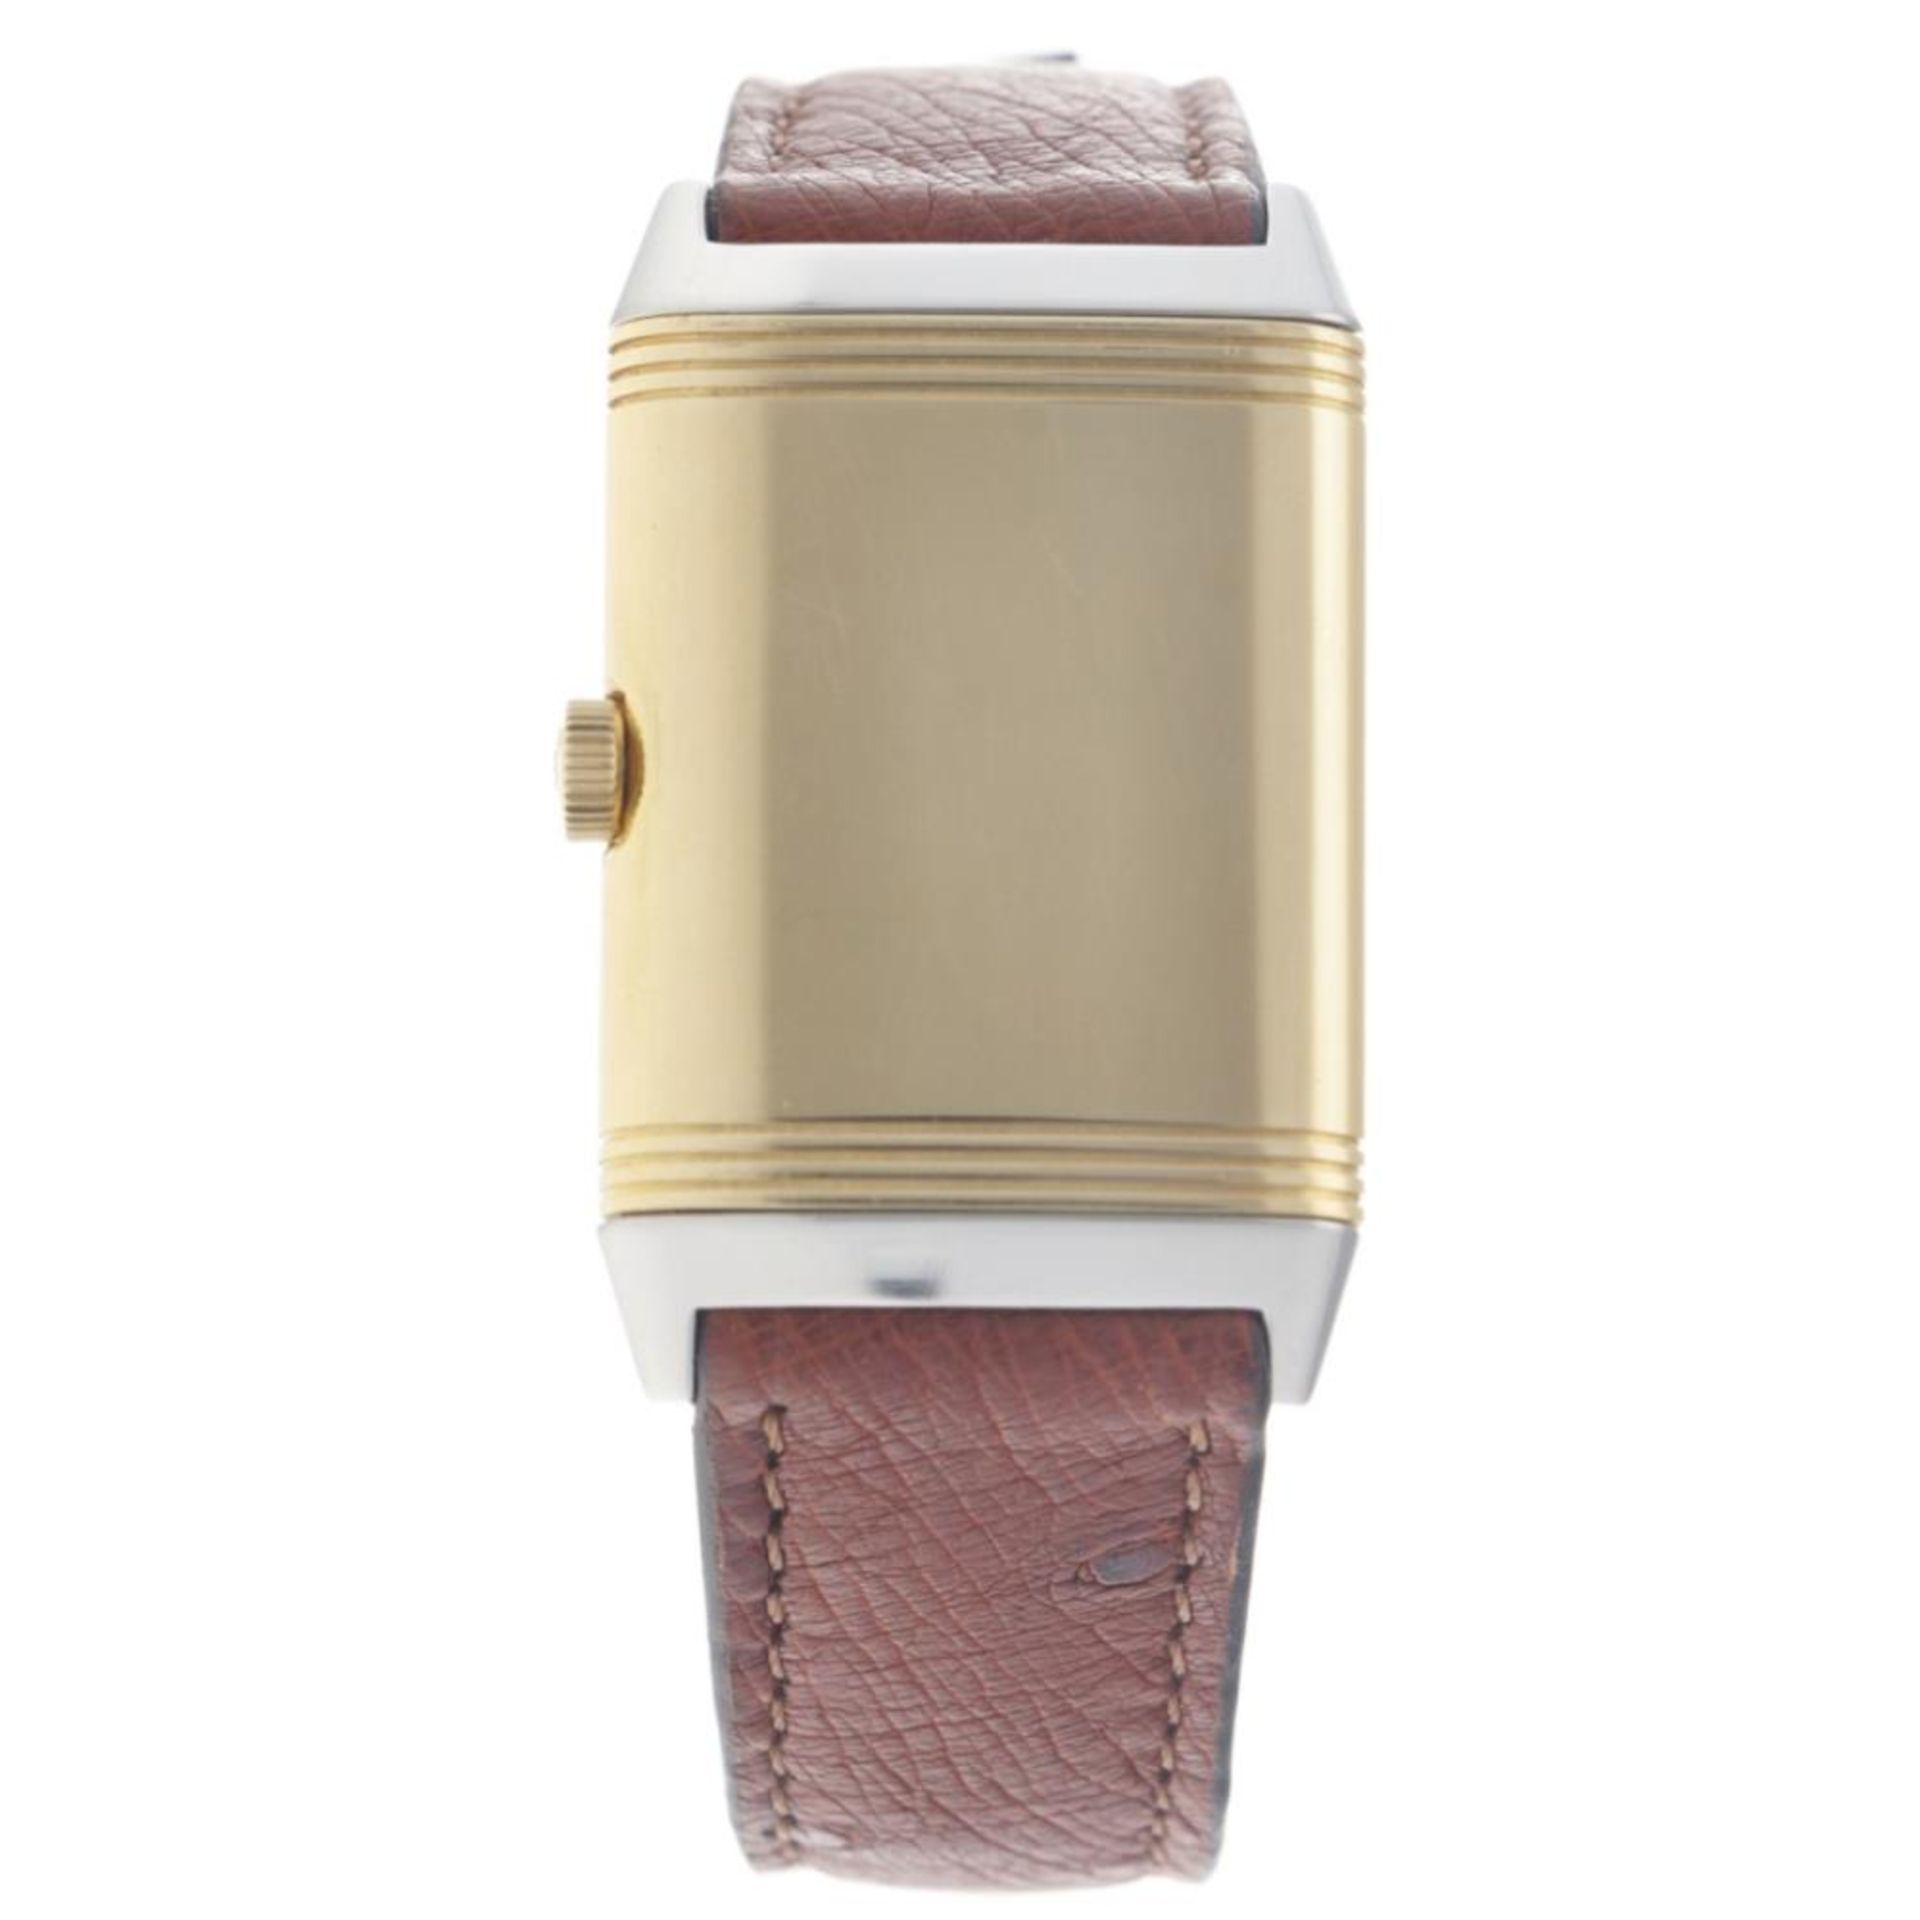 Jaeger-LeCoultre Reverso - Men's watch - approx. 1995. - Image 9 of 14